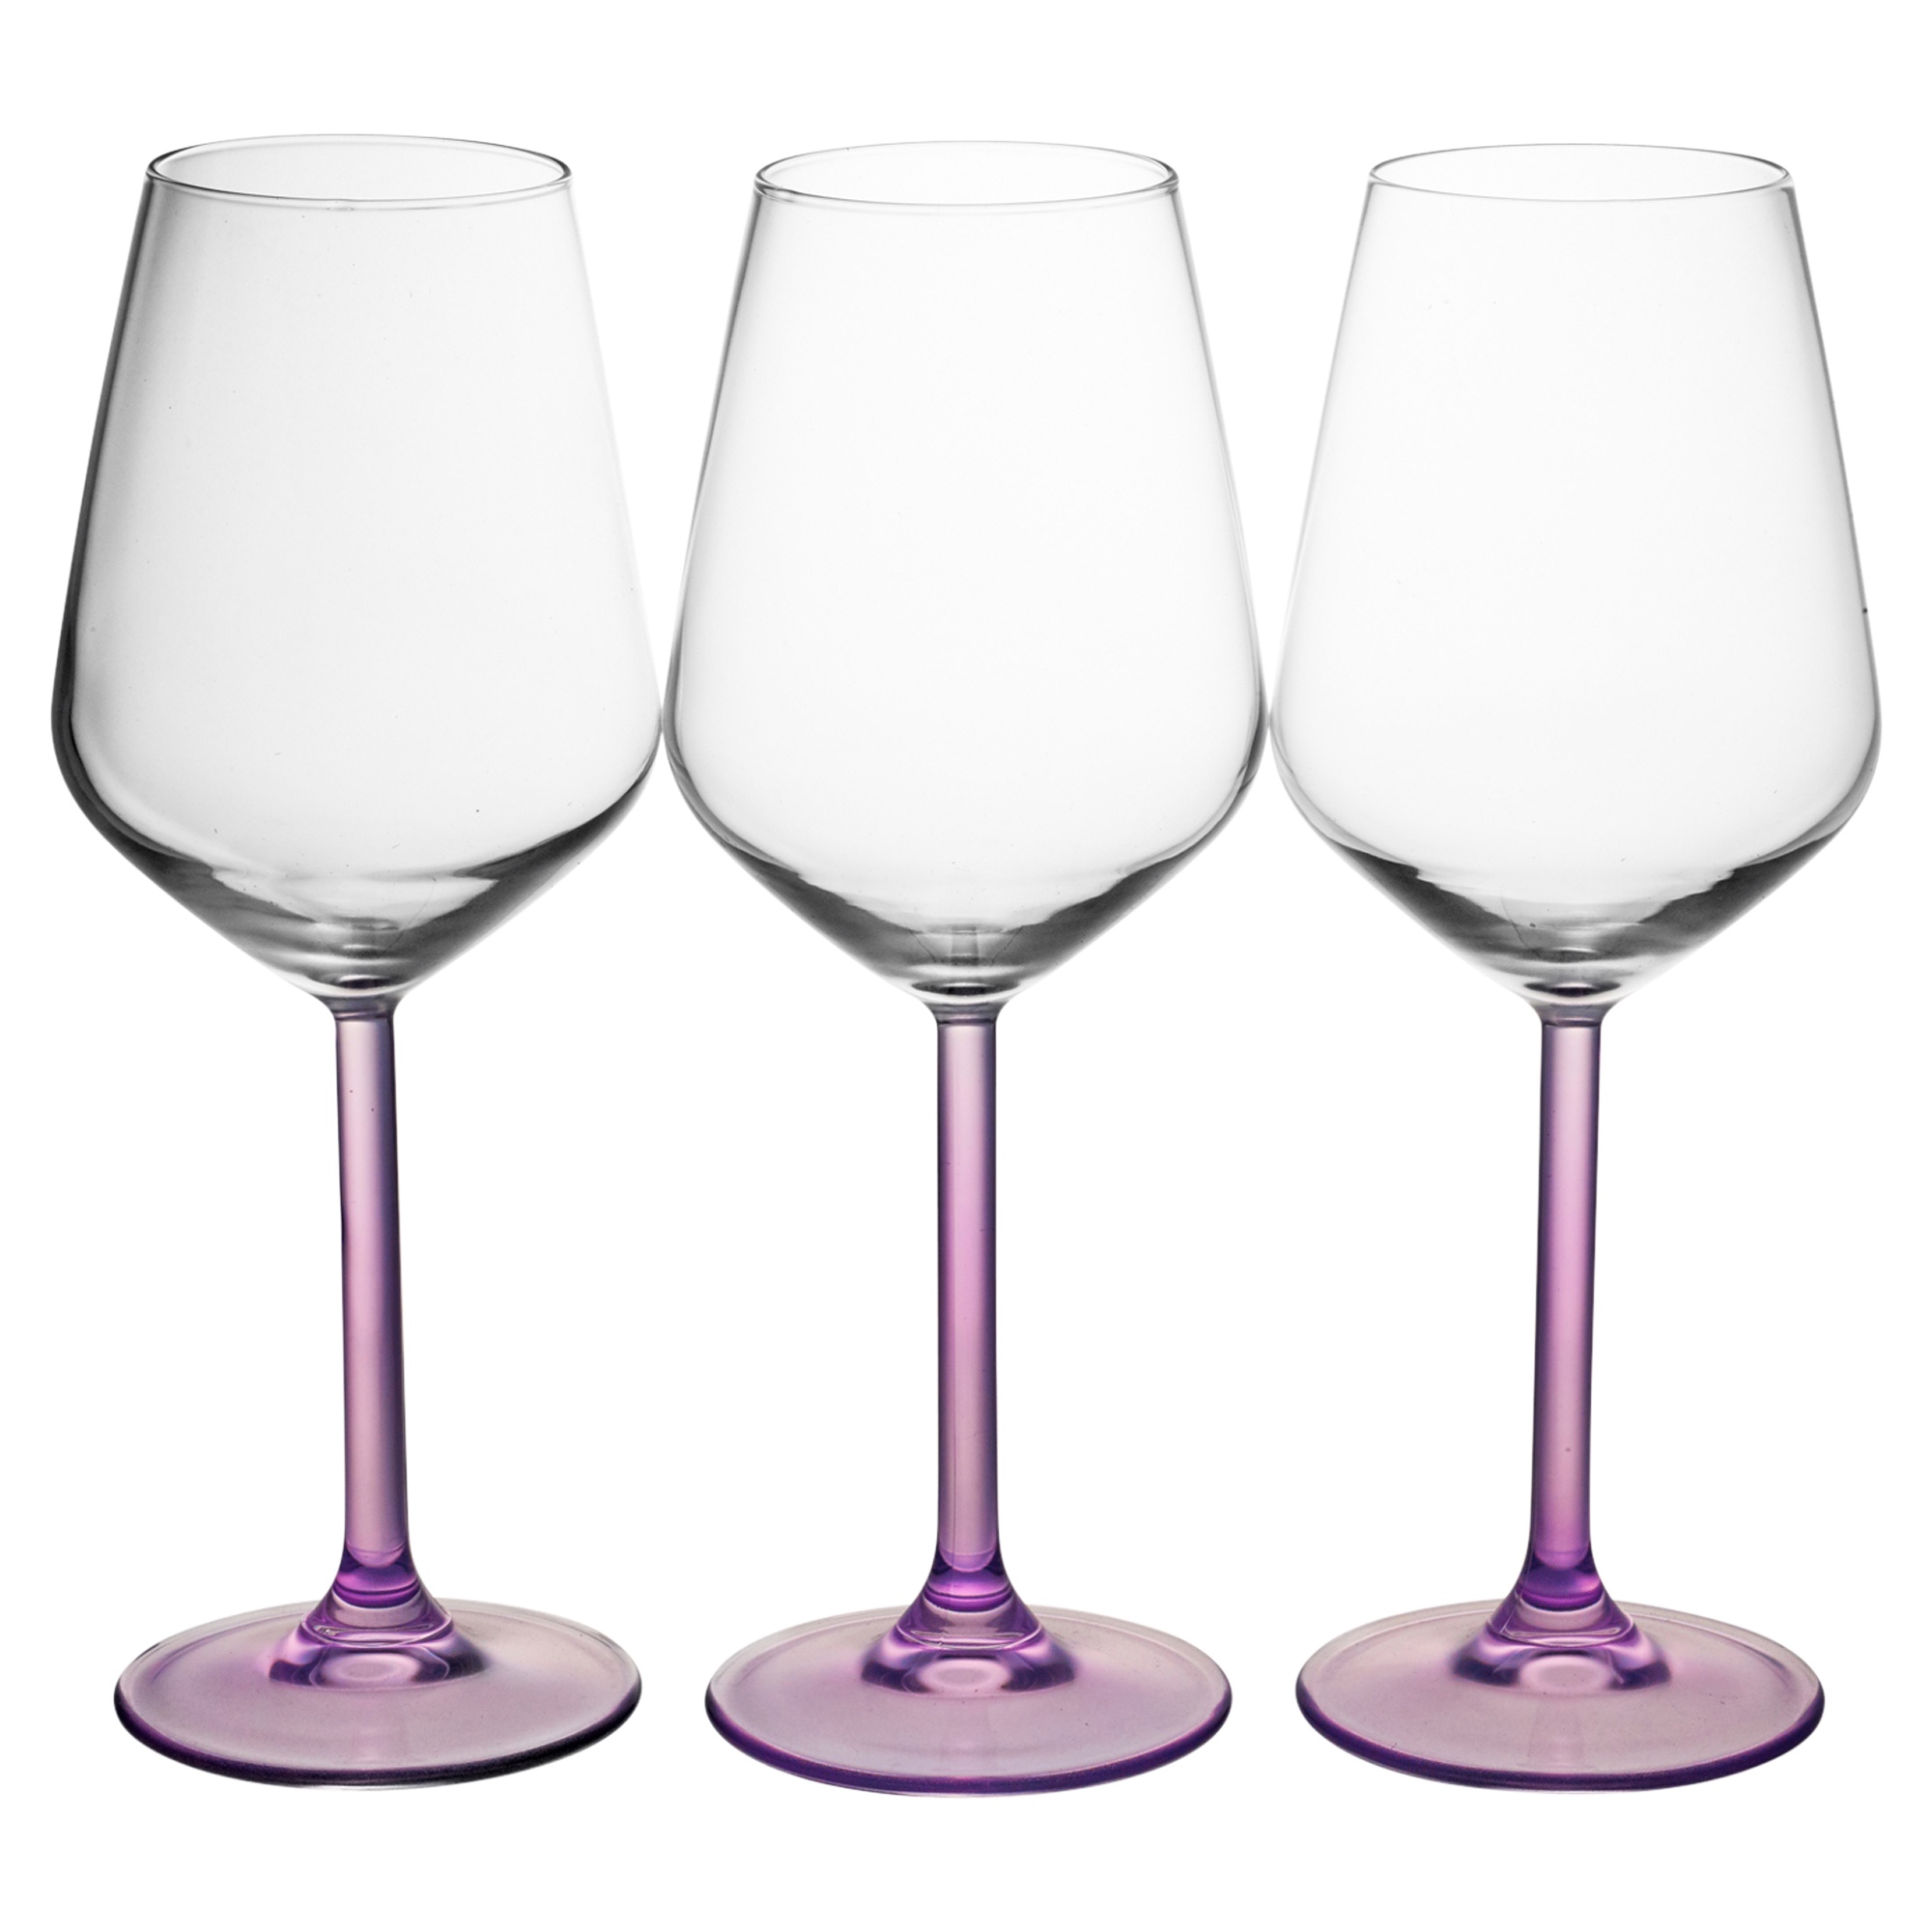 Large Wine Glasses Set Of 6 Purple Coloured Stem For Red And White Wine Winter 8693357399310 Ebay